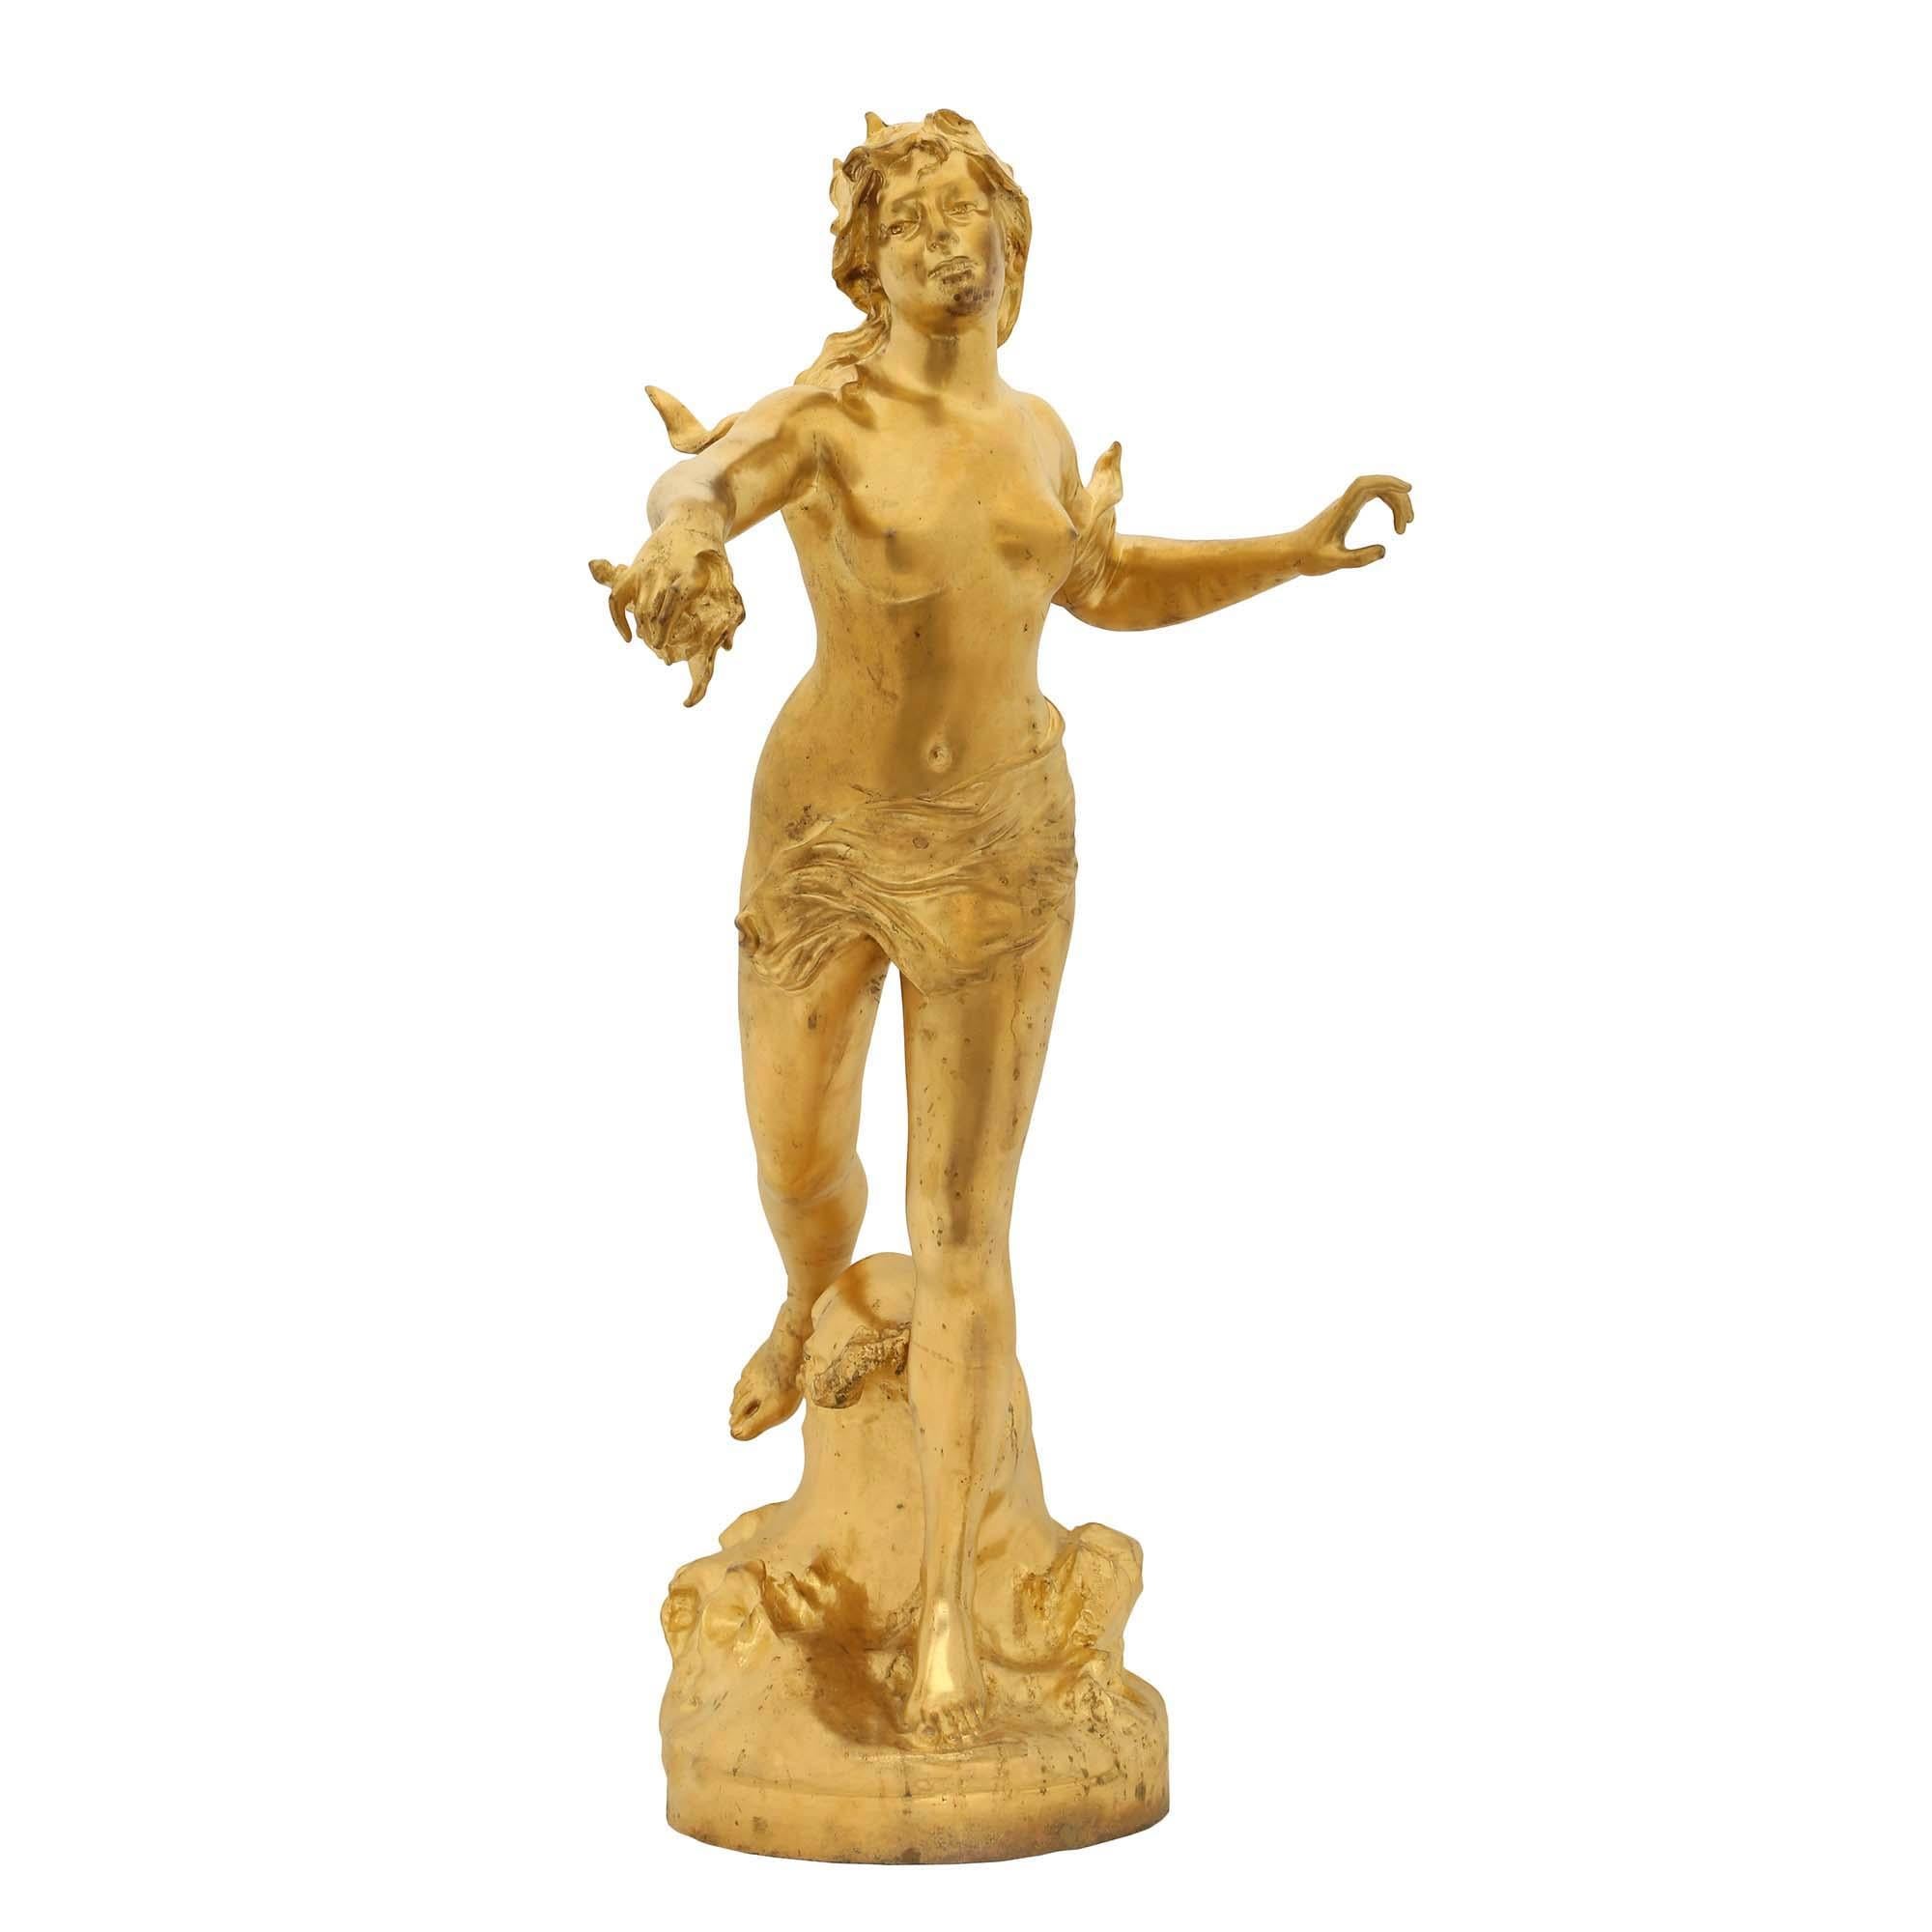  French 19th Century Ormolu Statue of Nereids, Signed Claude-André Férigoule For Sale 3